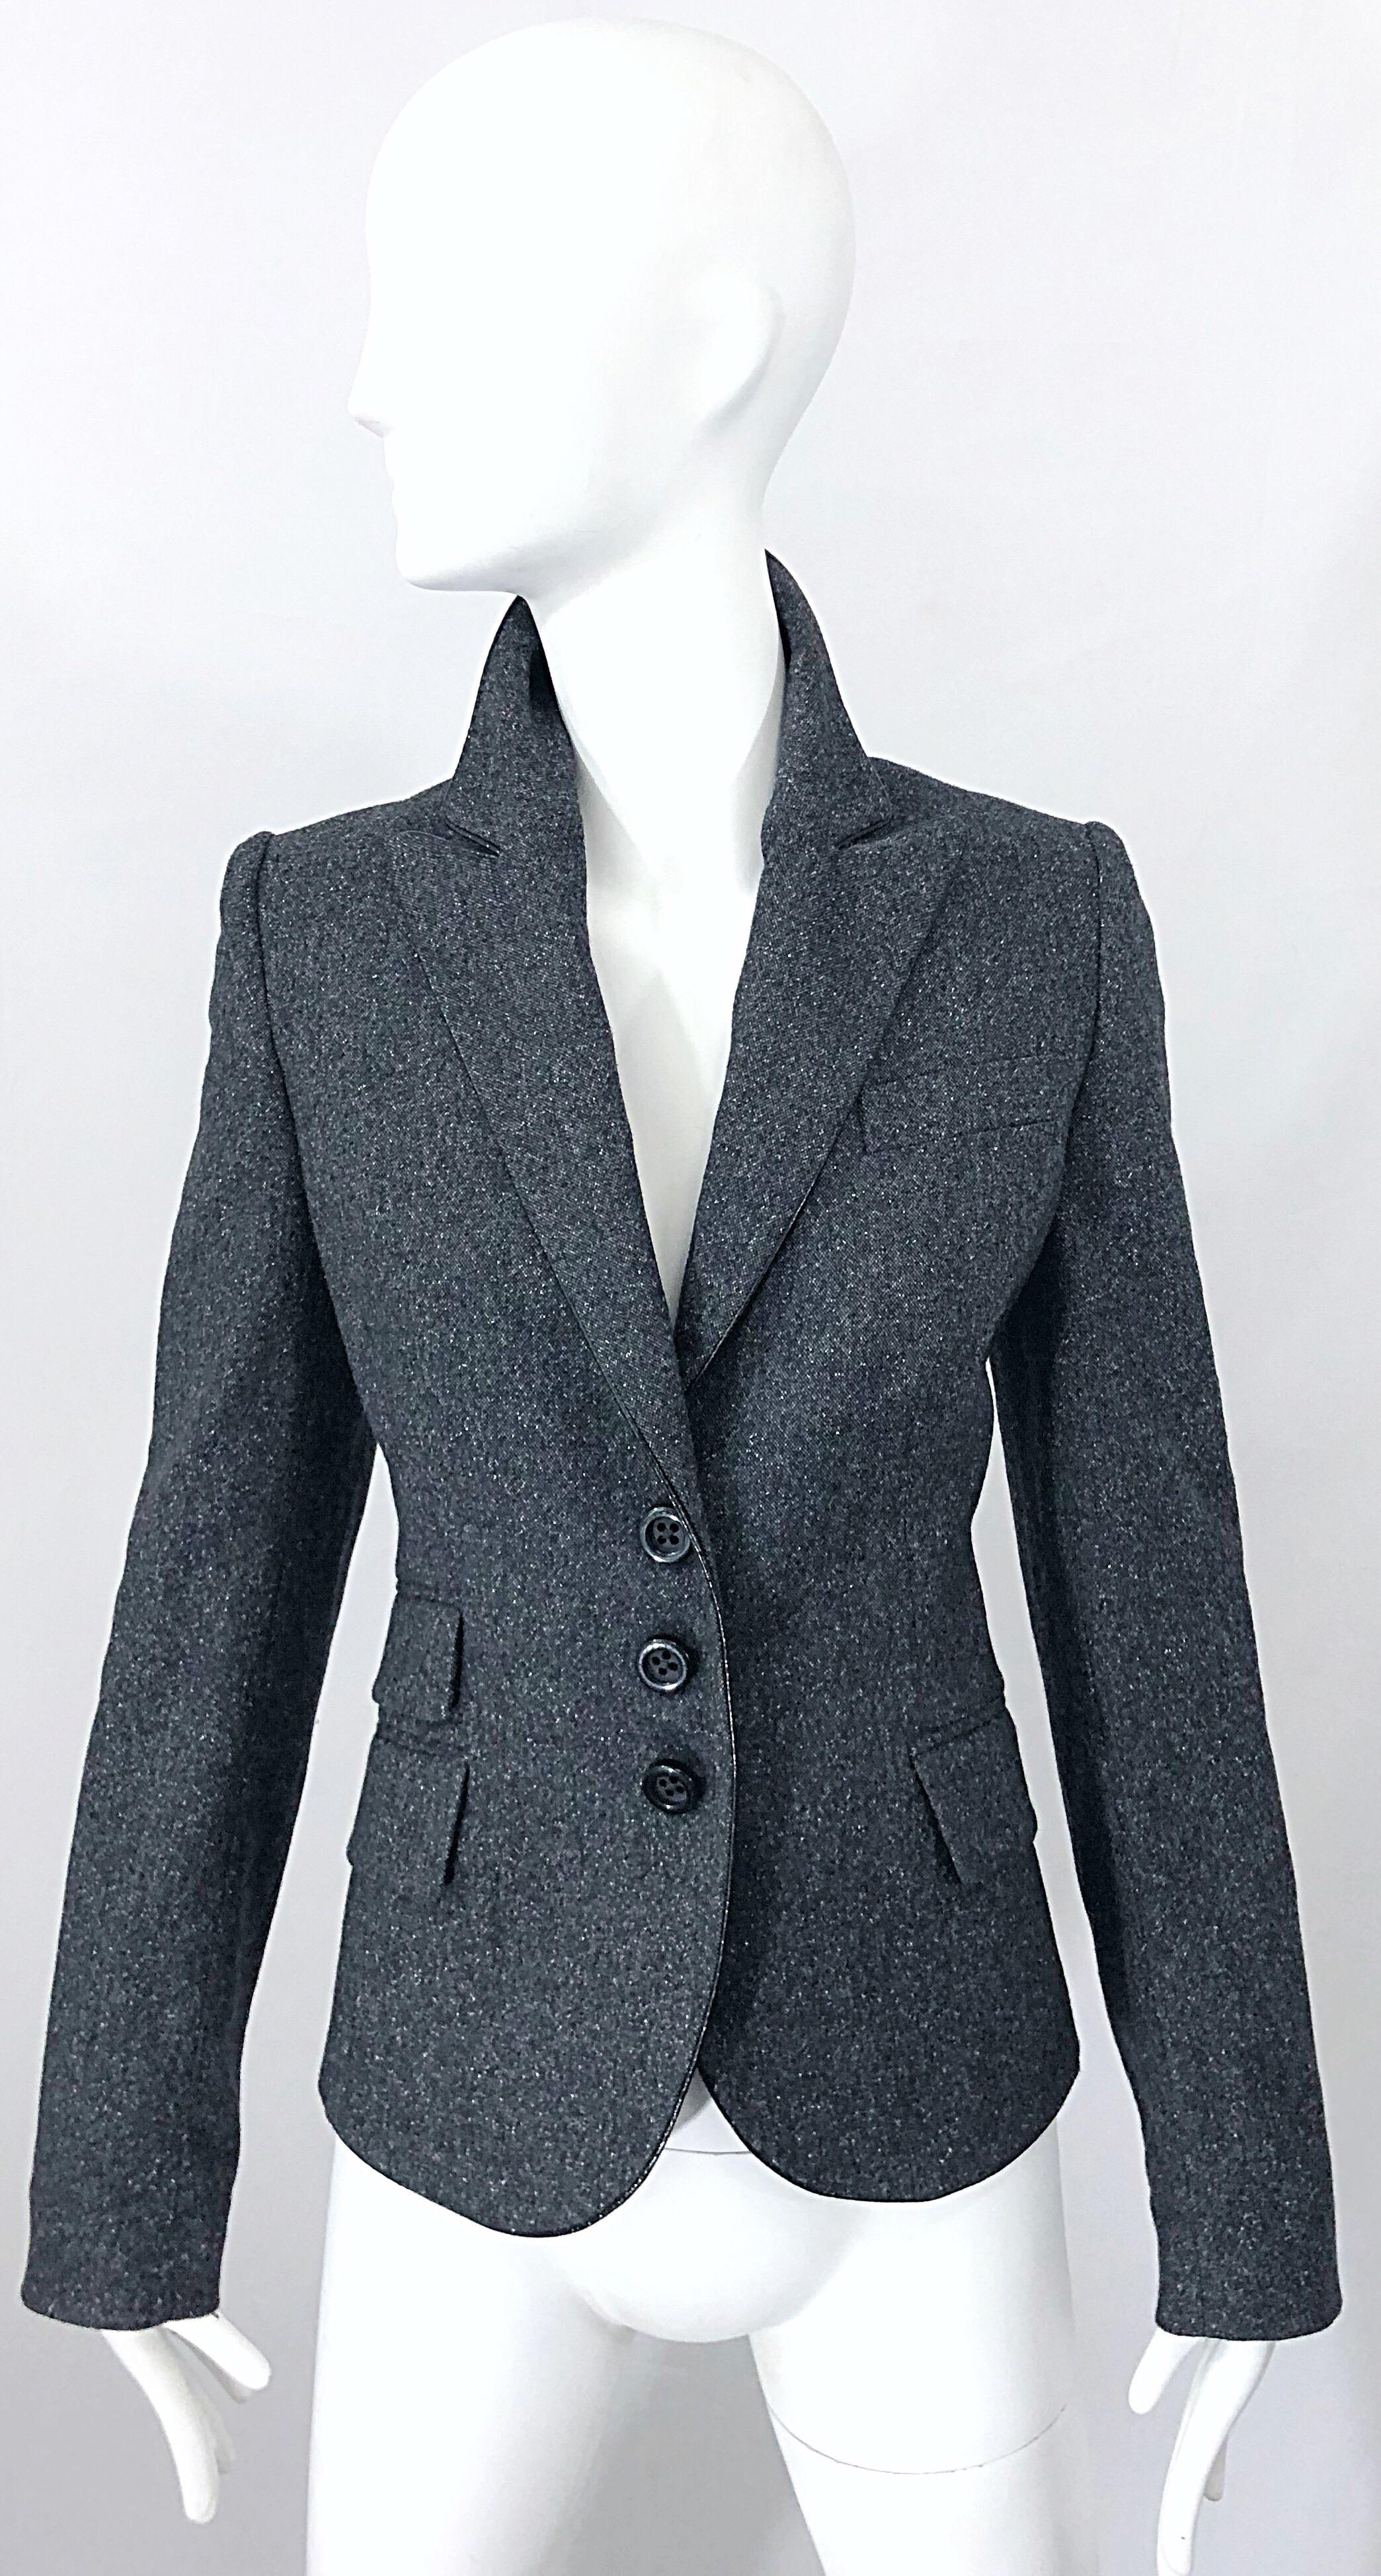 Stylish new JOHN RICHMOND X grey fitted slim fit blazer jacket! Smart tailoring, with three buttons up the front, two pockets at the right side of the waist, and one on the left. Black PVC piping along the trim of the collar, lapels, and edges.